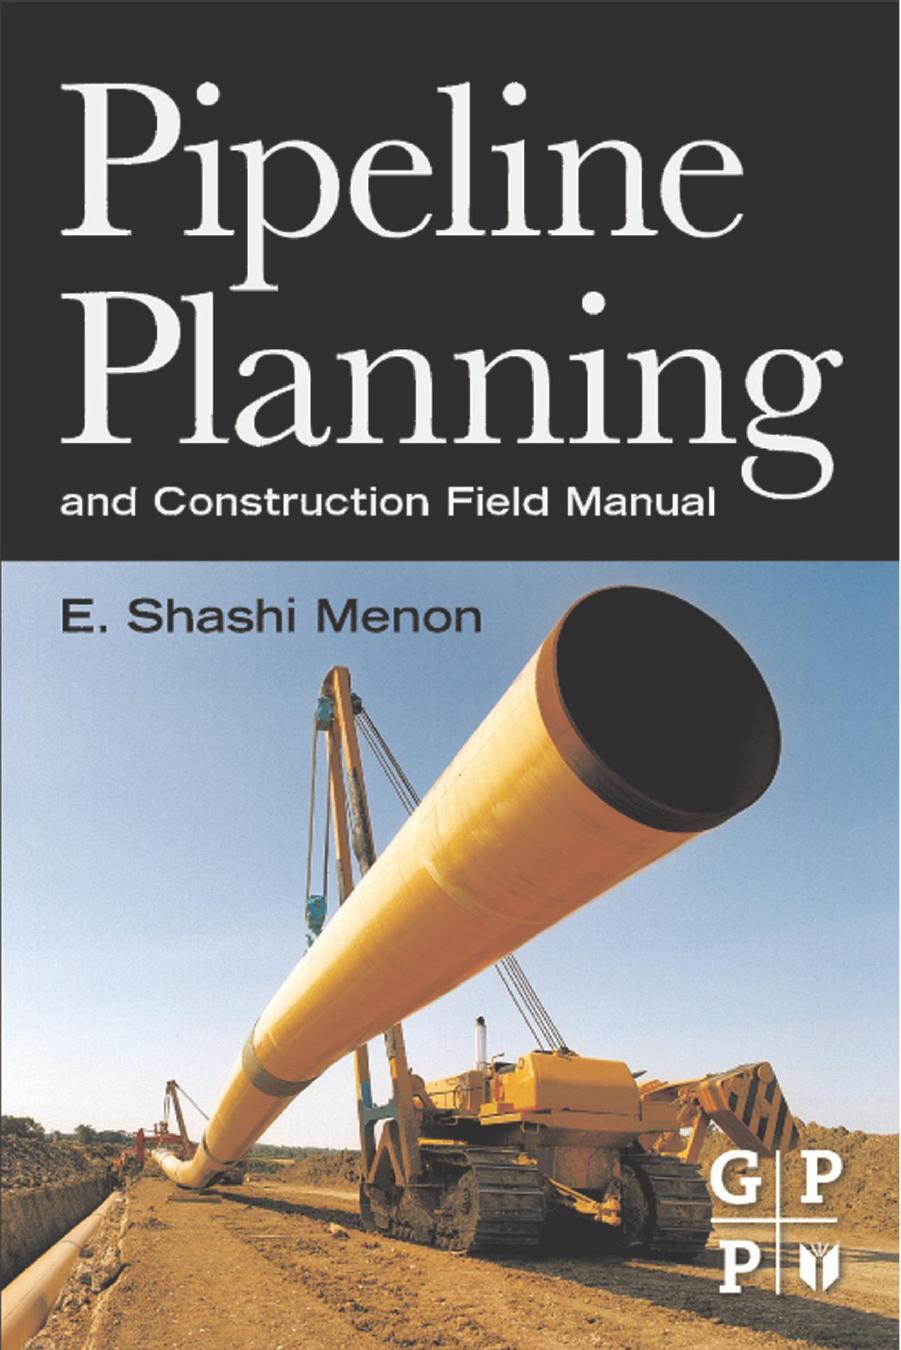 ebooksclub.org  Pipeline Planning and Construction Field Manual 2011